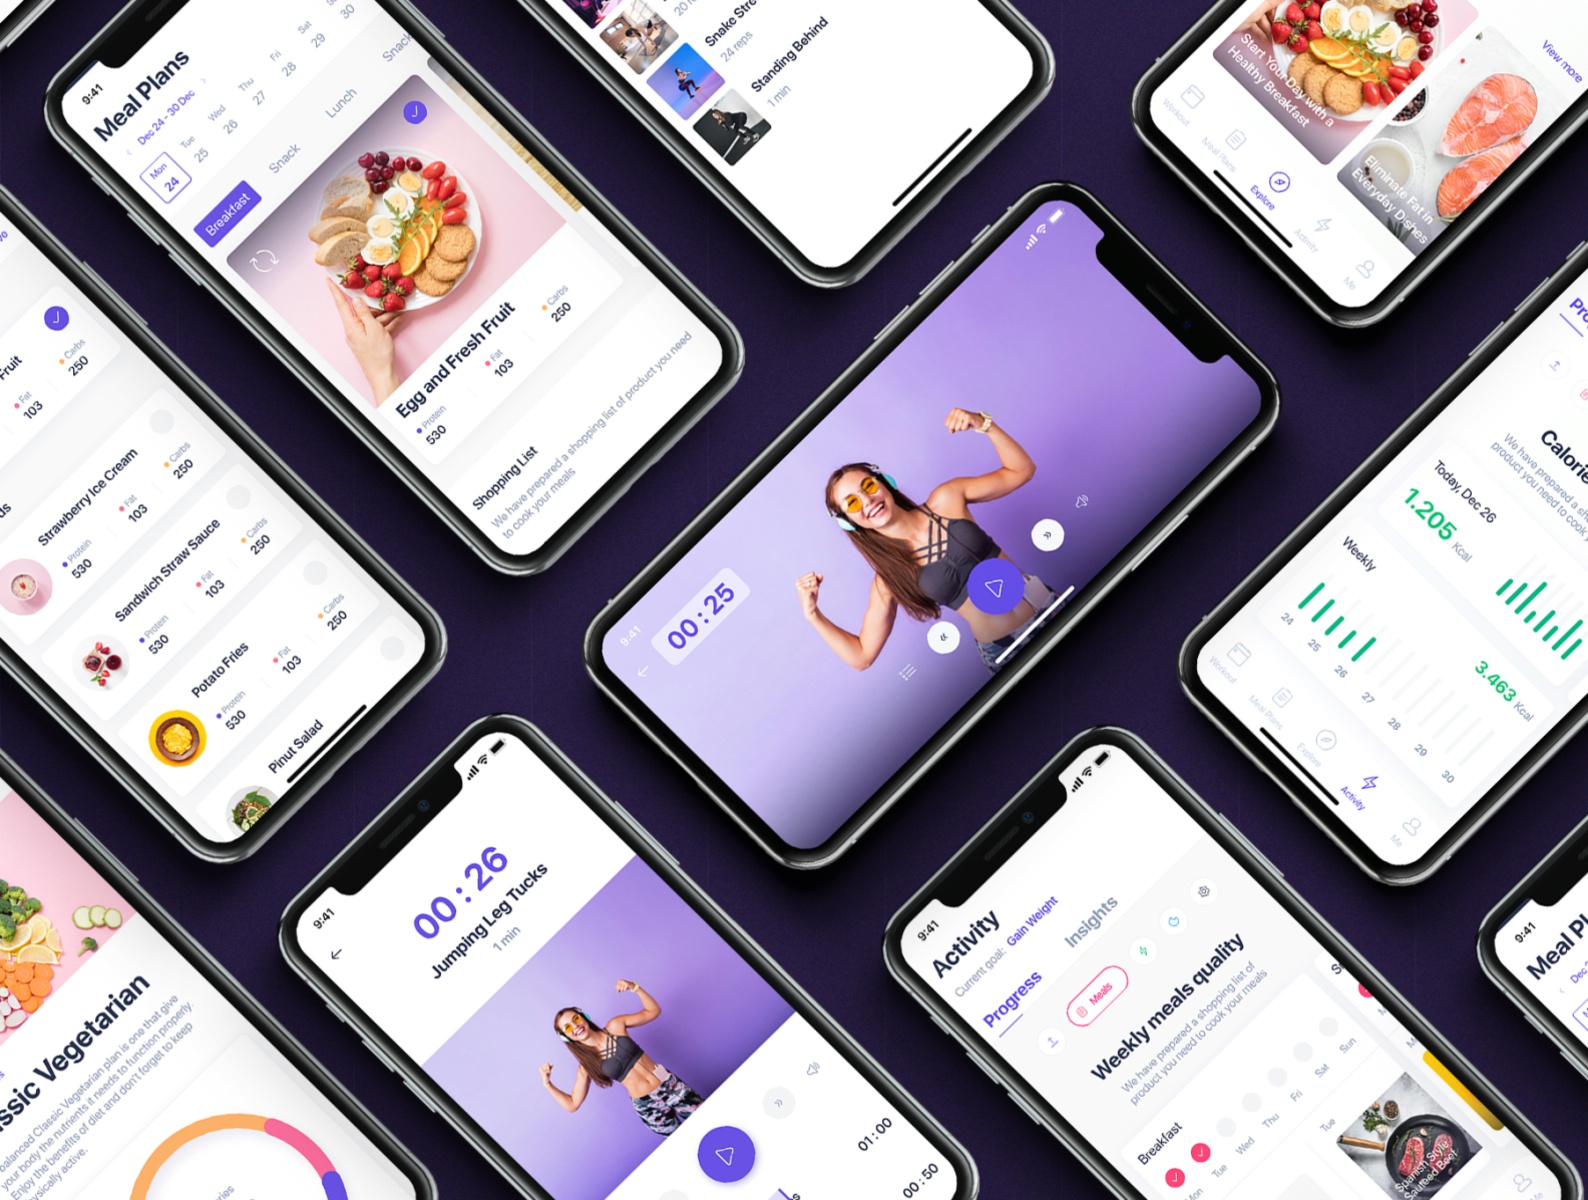 Fitbox - Workouts &amp; Meal Planner UI Kit